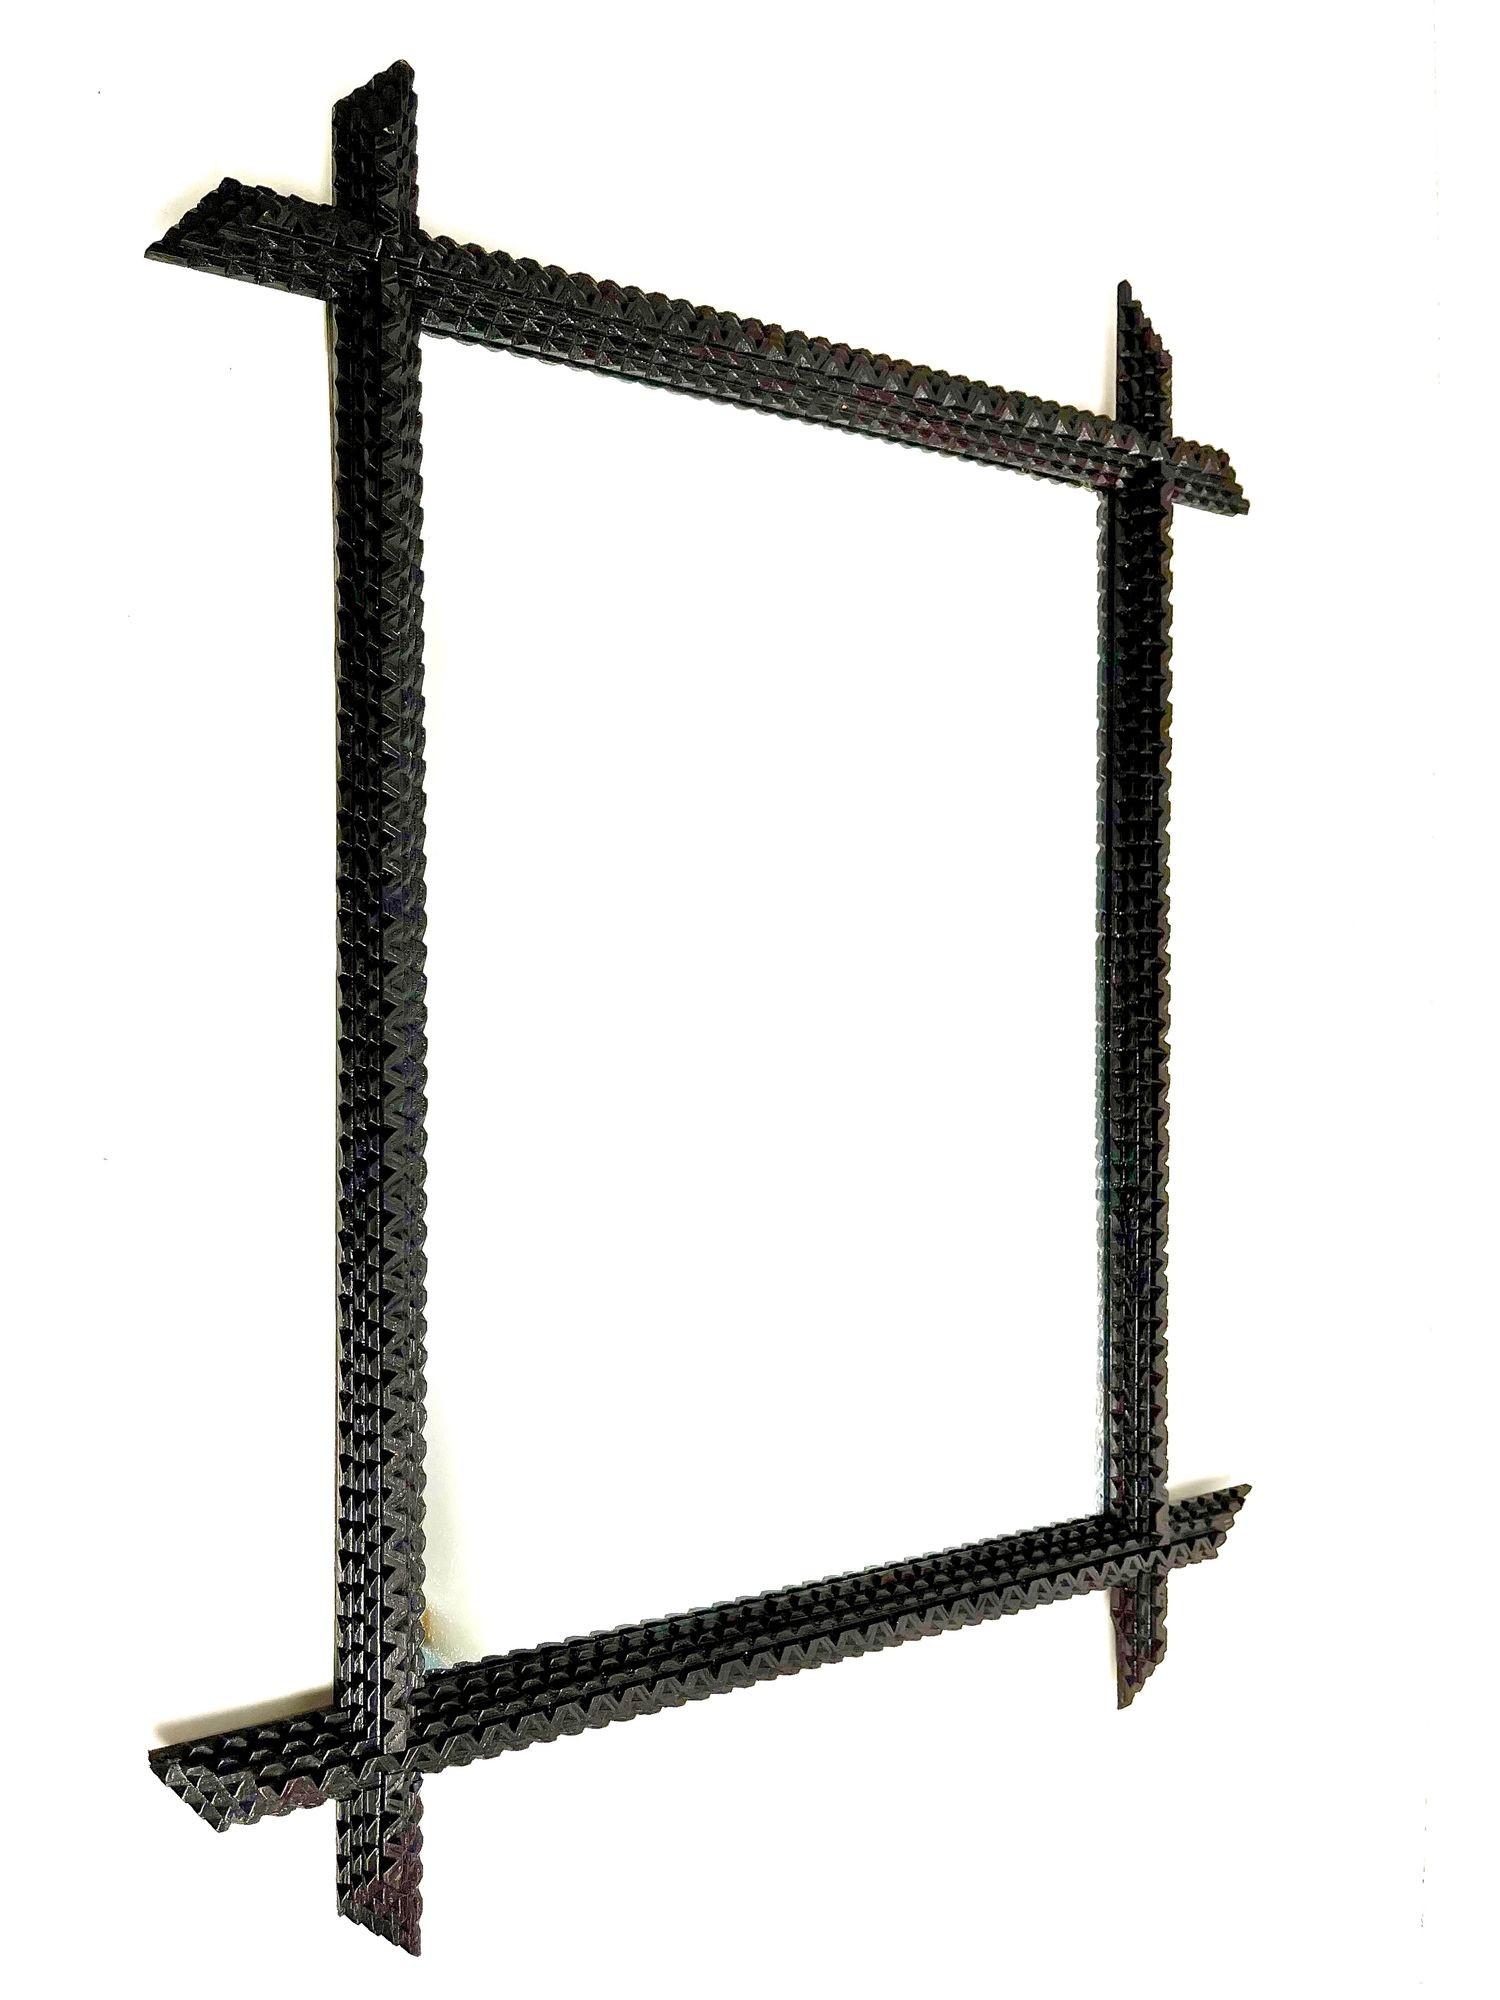 Beautiful rustic Tramp Art Mirror from the late 19th century in Austria, elaborately handcarved around 1890. This unique wall mirror impresses with its slim, chip carved designed frame, the famous 